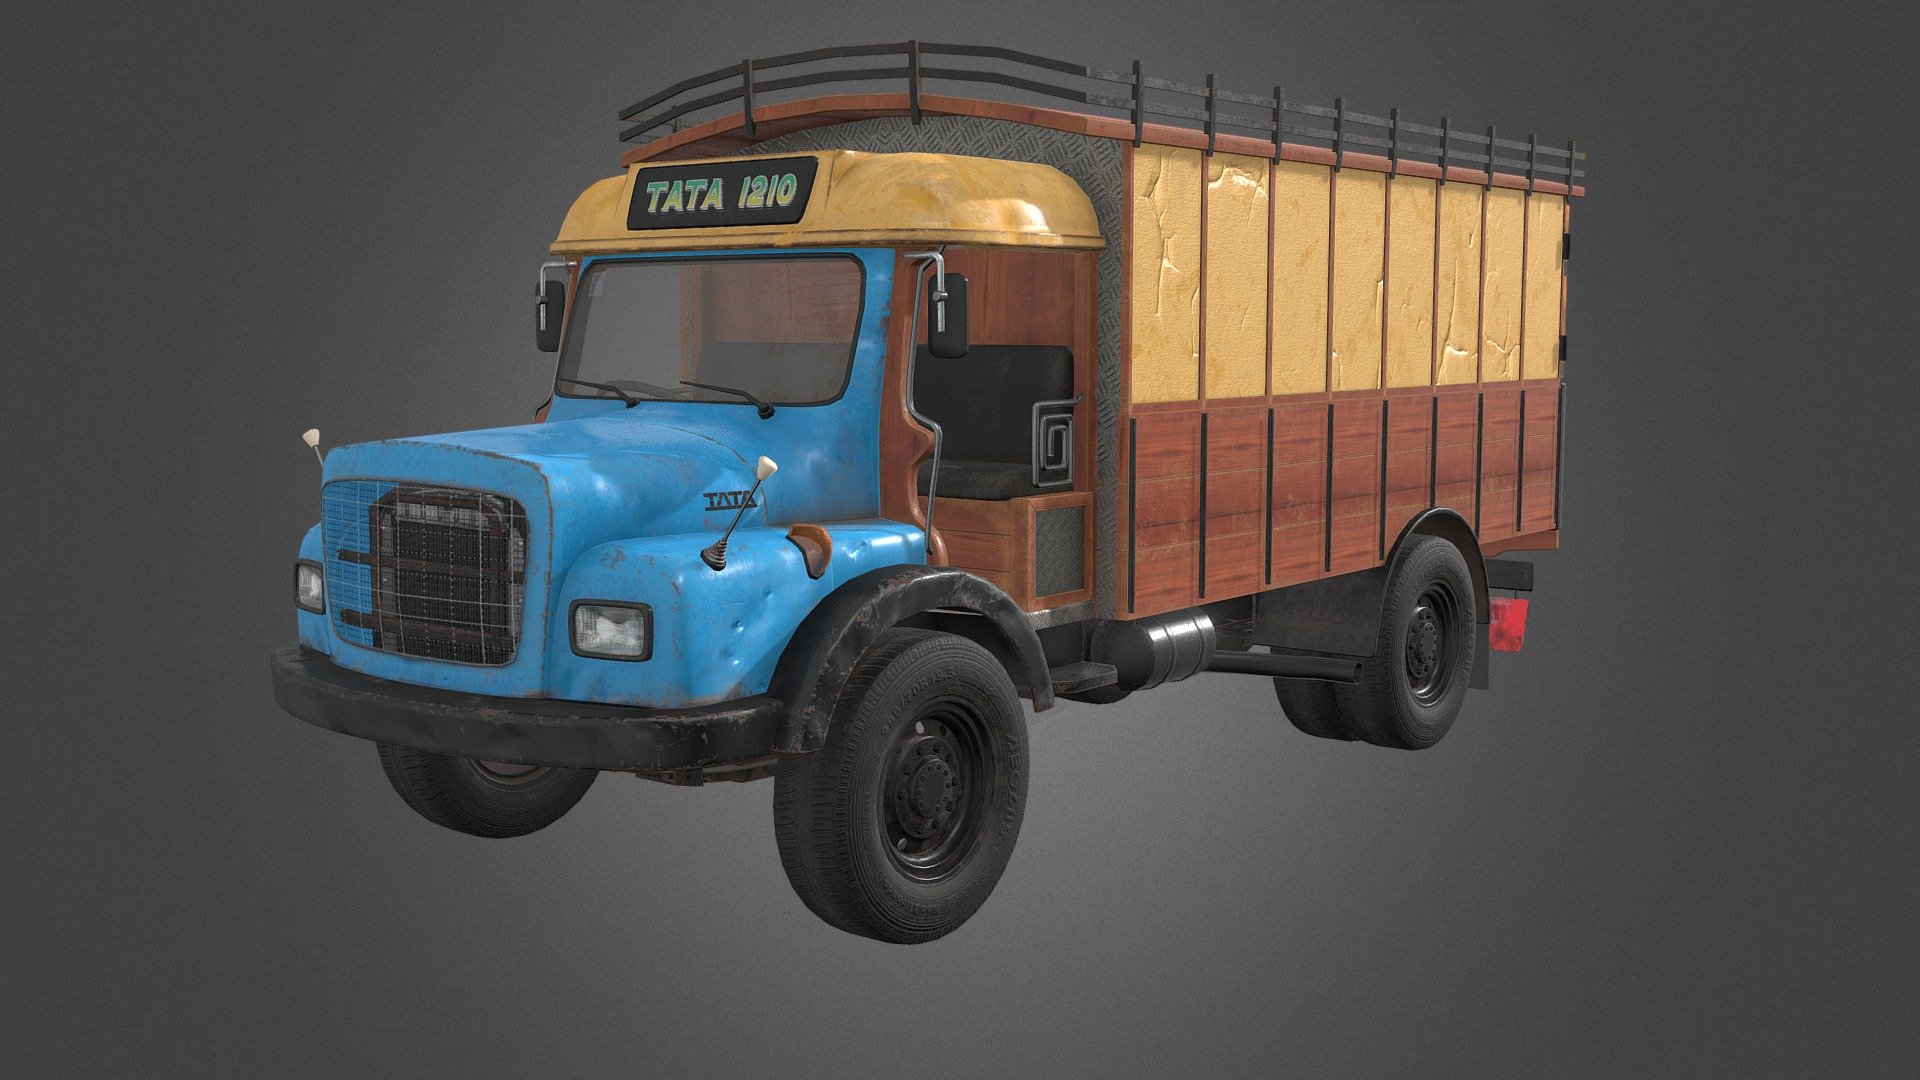 The Tata 1210 is a medium-duty truck produced by Tata Motors. Known for its reliability, it typically has a payload capacity of around 12 tons. The truck is often used for various cargo transport applications and is recognized for its sturdy build and fuel efficiency.
Common Transport Vehicle in Srilanka &amp; India 3d model